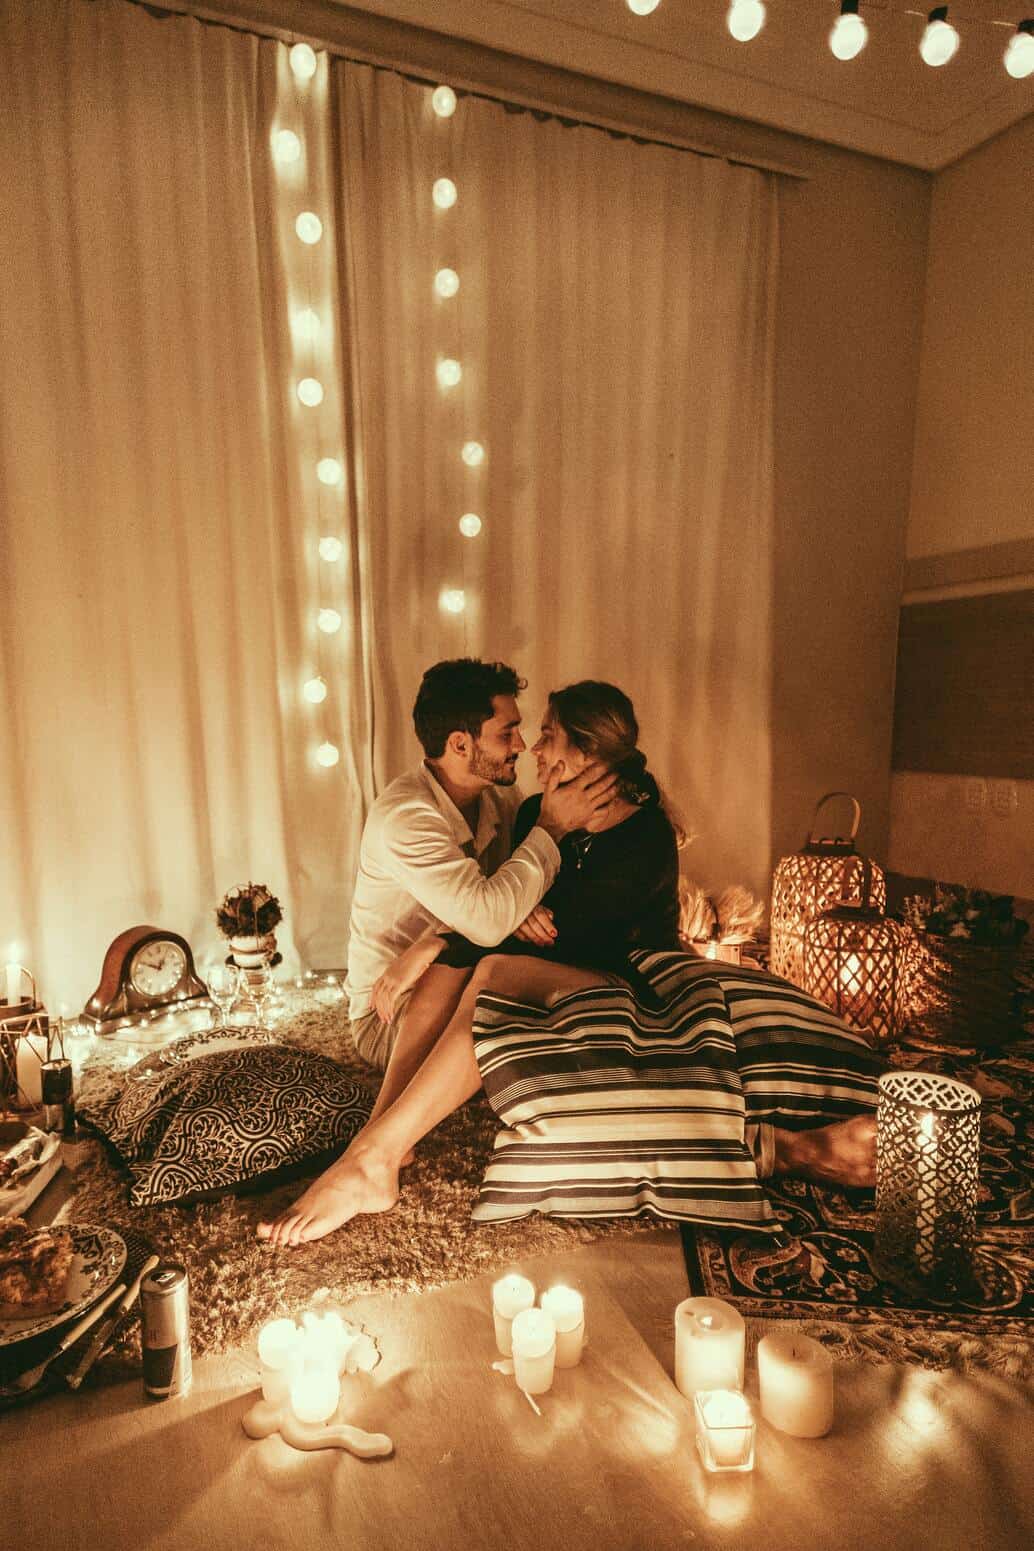 sweet couple with candles and pillows on the floor